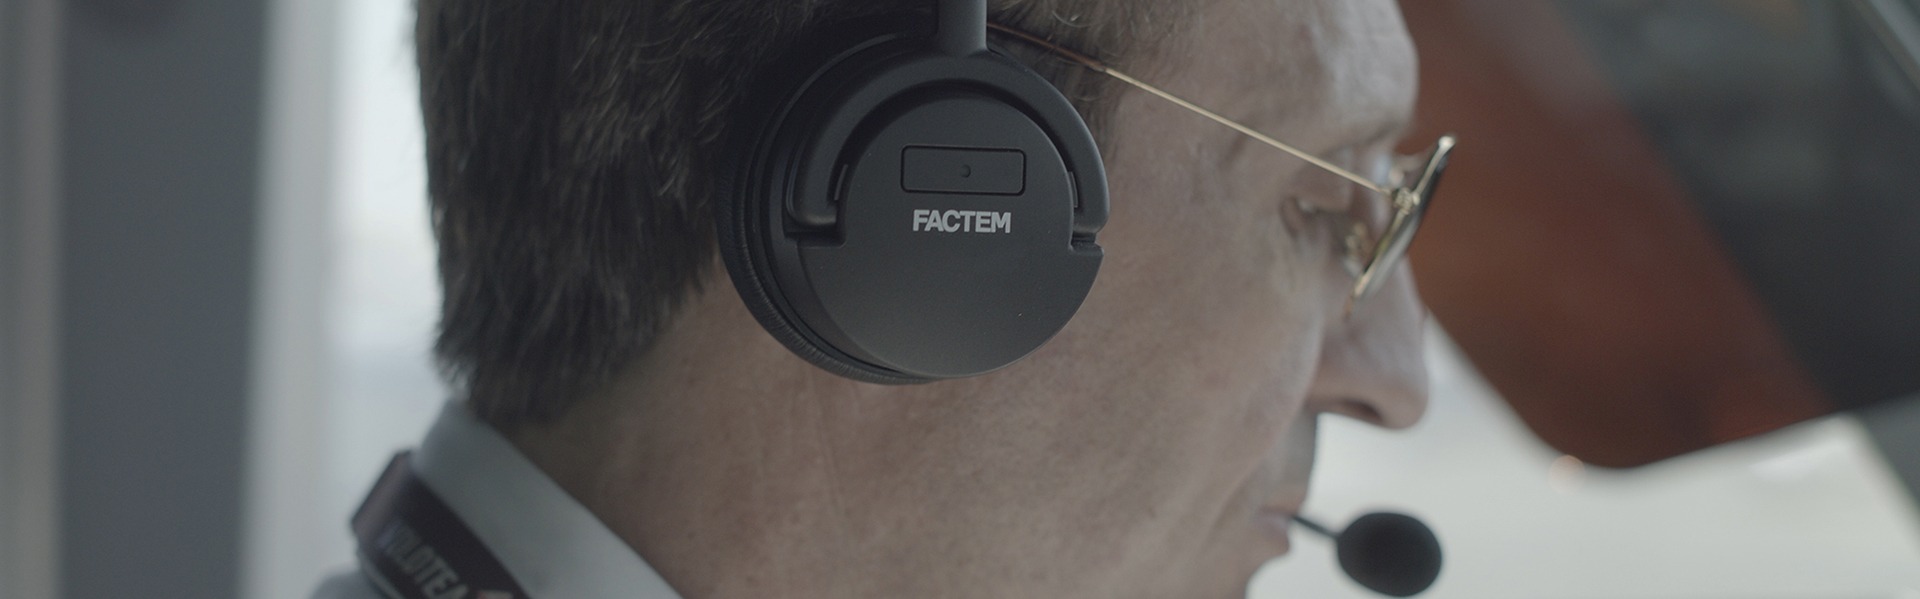 Pilot headsets. Company Factem takes off with Airbus in Bayeux, France